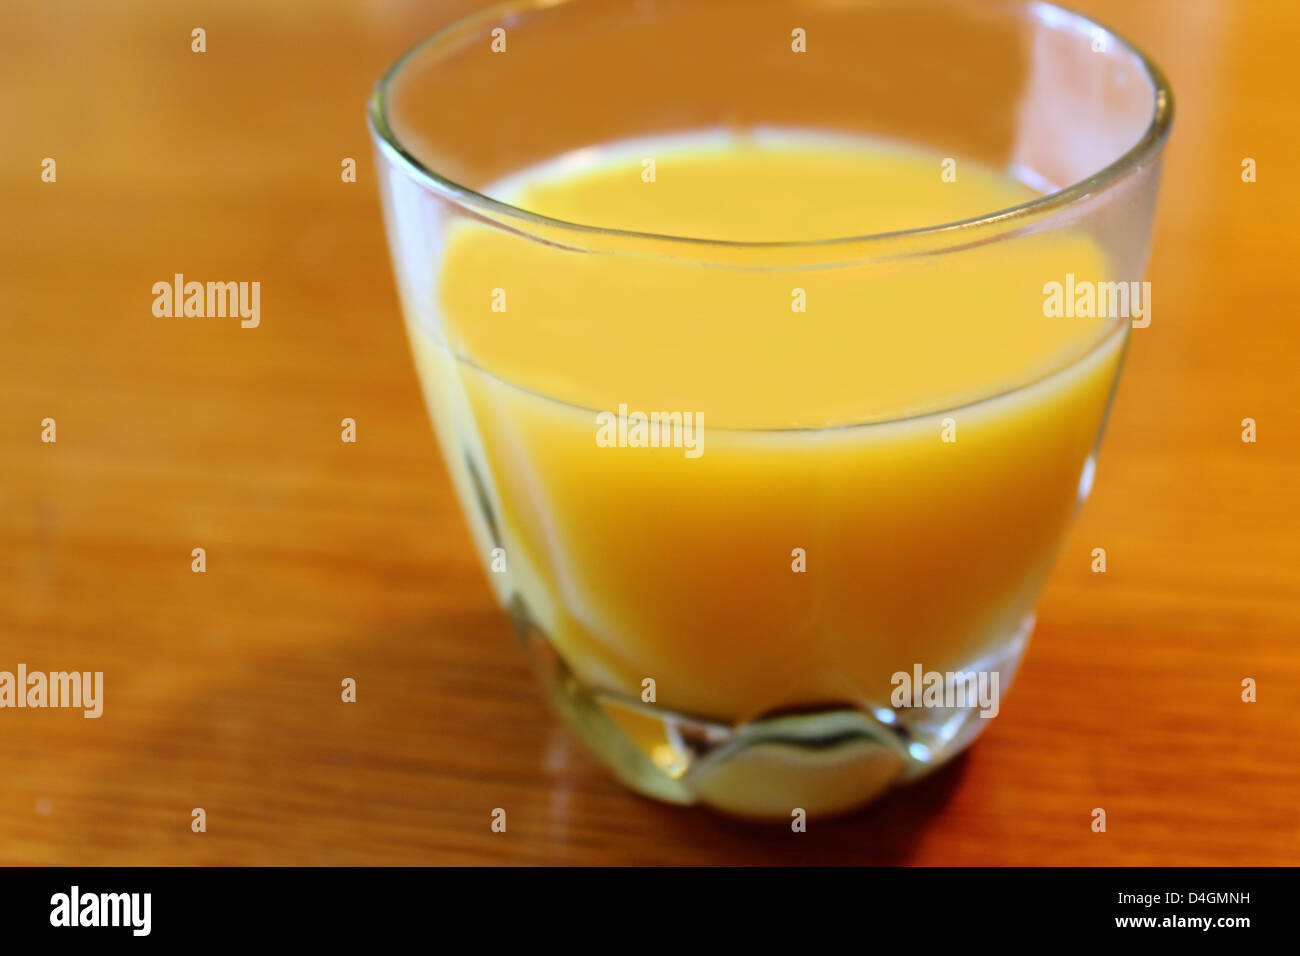 Glass Of Oj High Resolution Stock Photography and Images - Alamy